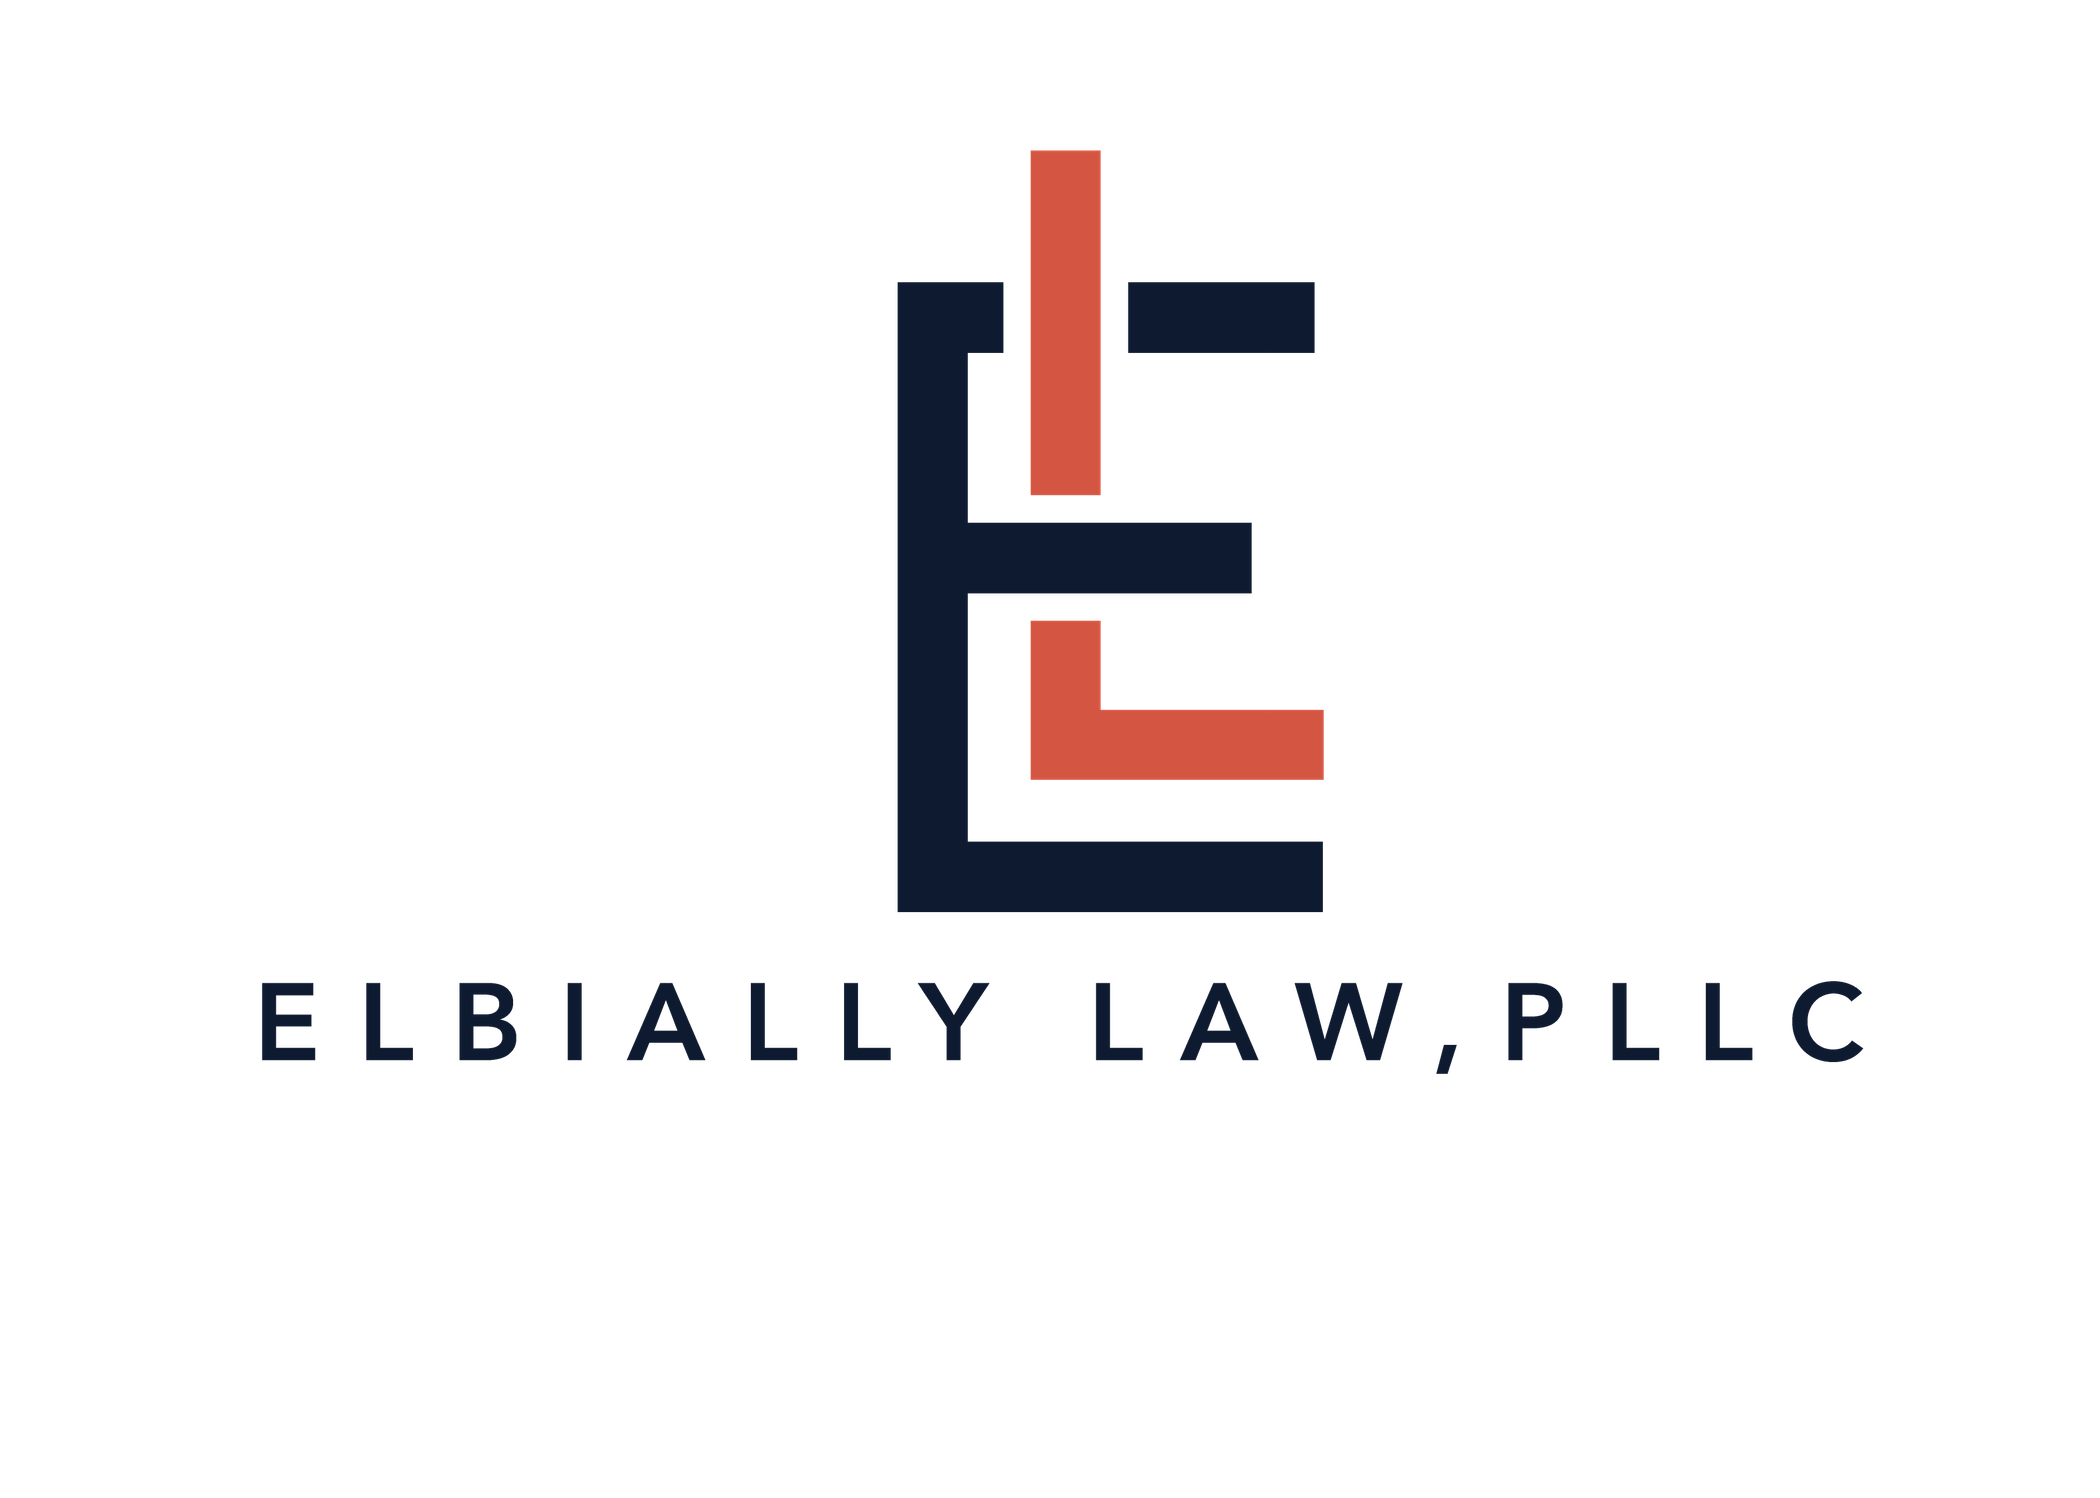 ELBIALLY LAW